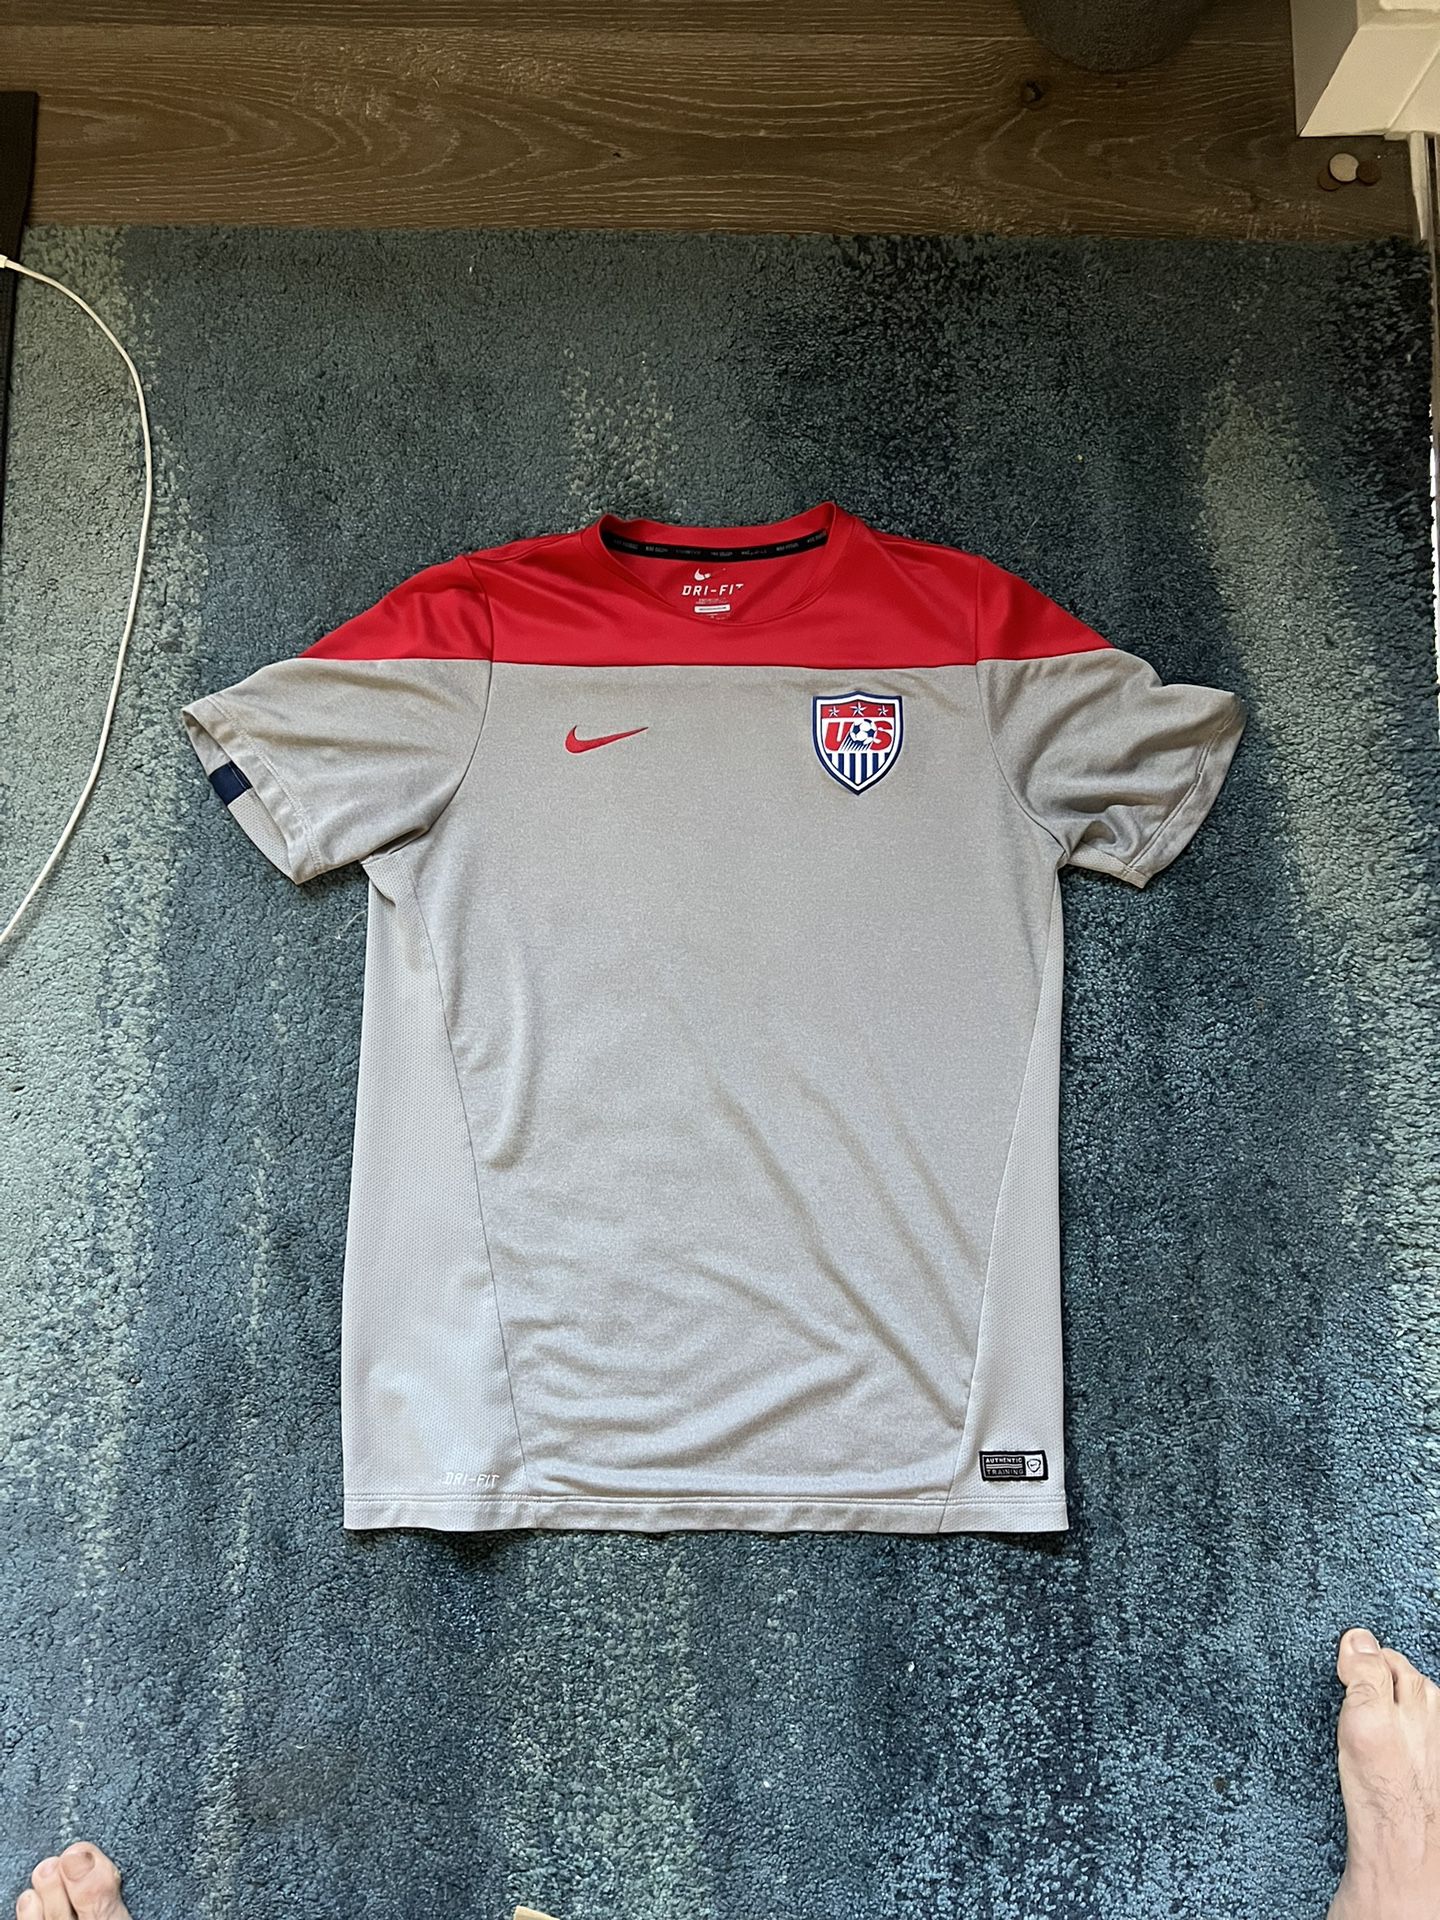 USA USMNT L 1996 West MLS All Star Game Jersey Vintage Soccer Fast Ship  Rare US for Sale in Westmont, IL - OfferUp